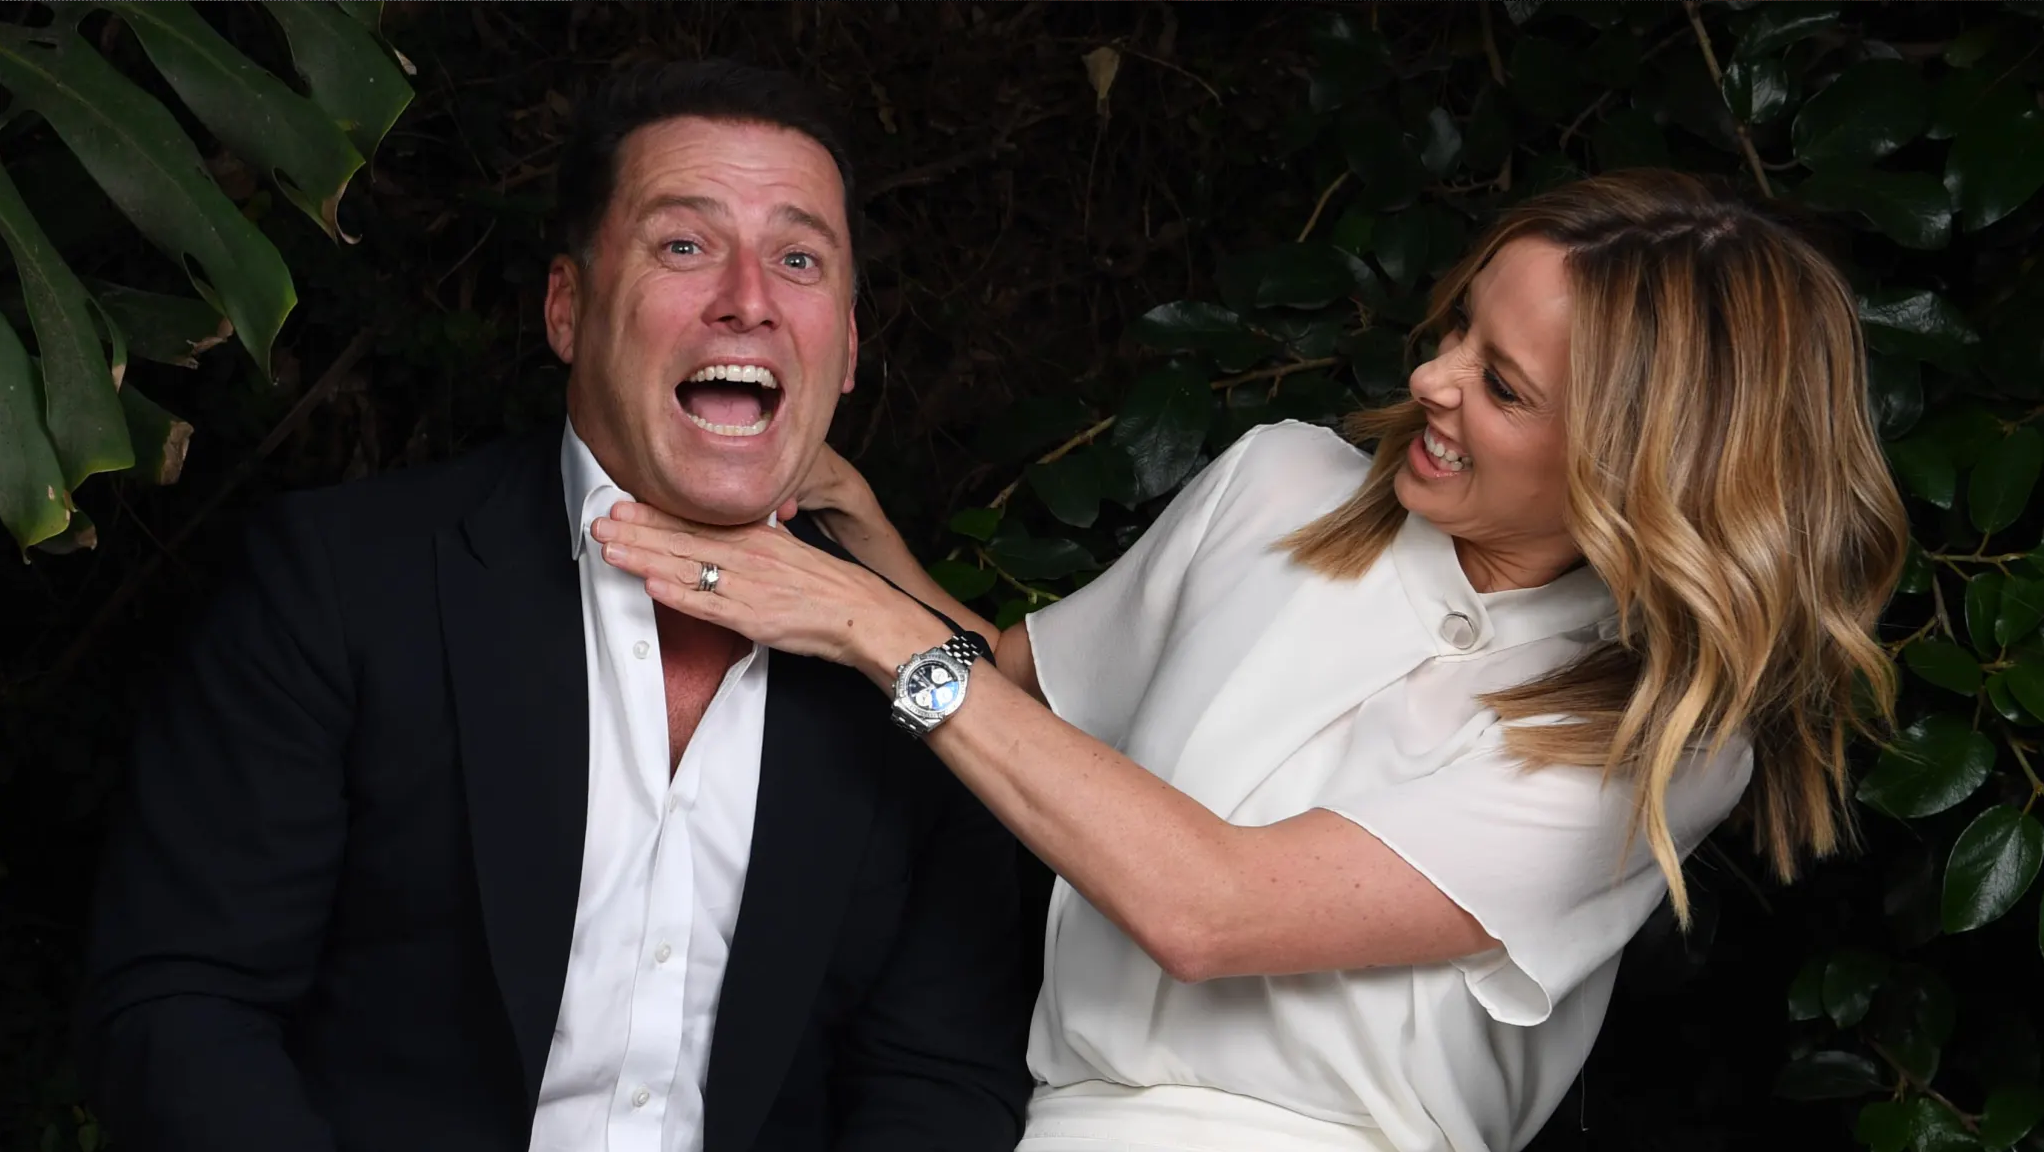   Karl Stefanovic  and  Allison Langdon  will host the TODAY show in 2020  PHOTO: Nine 